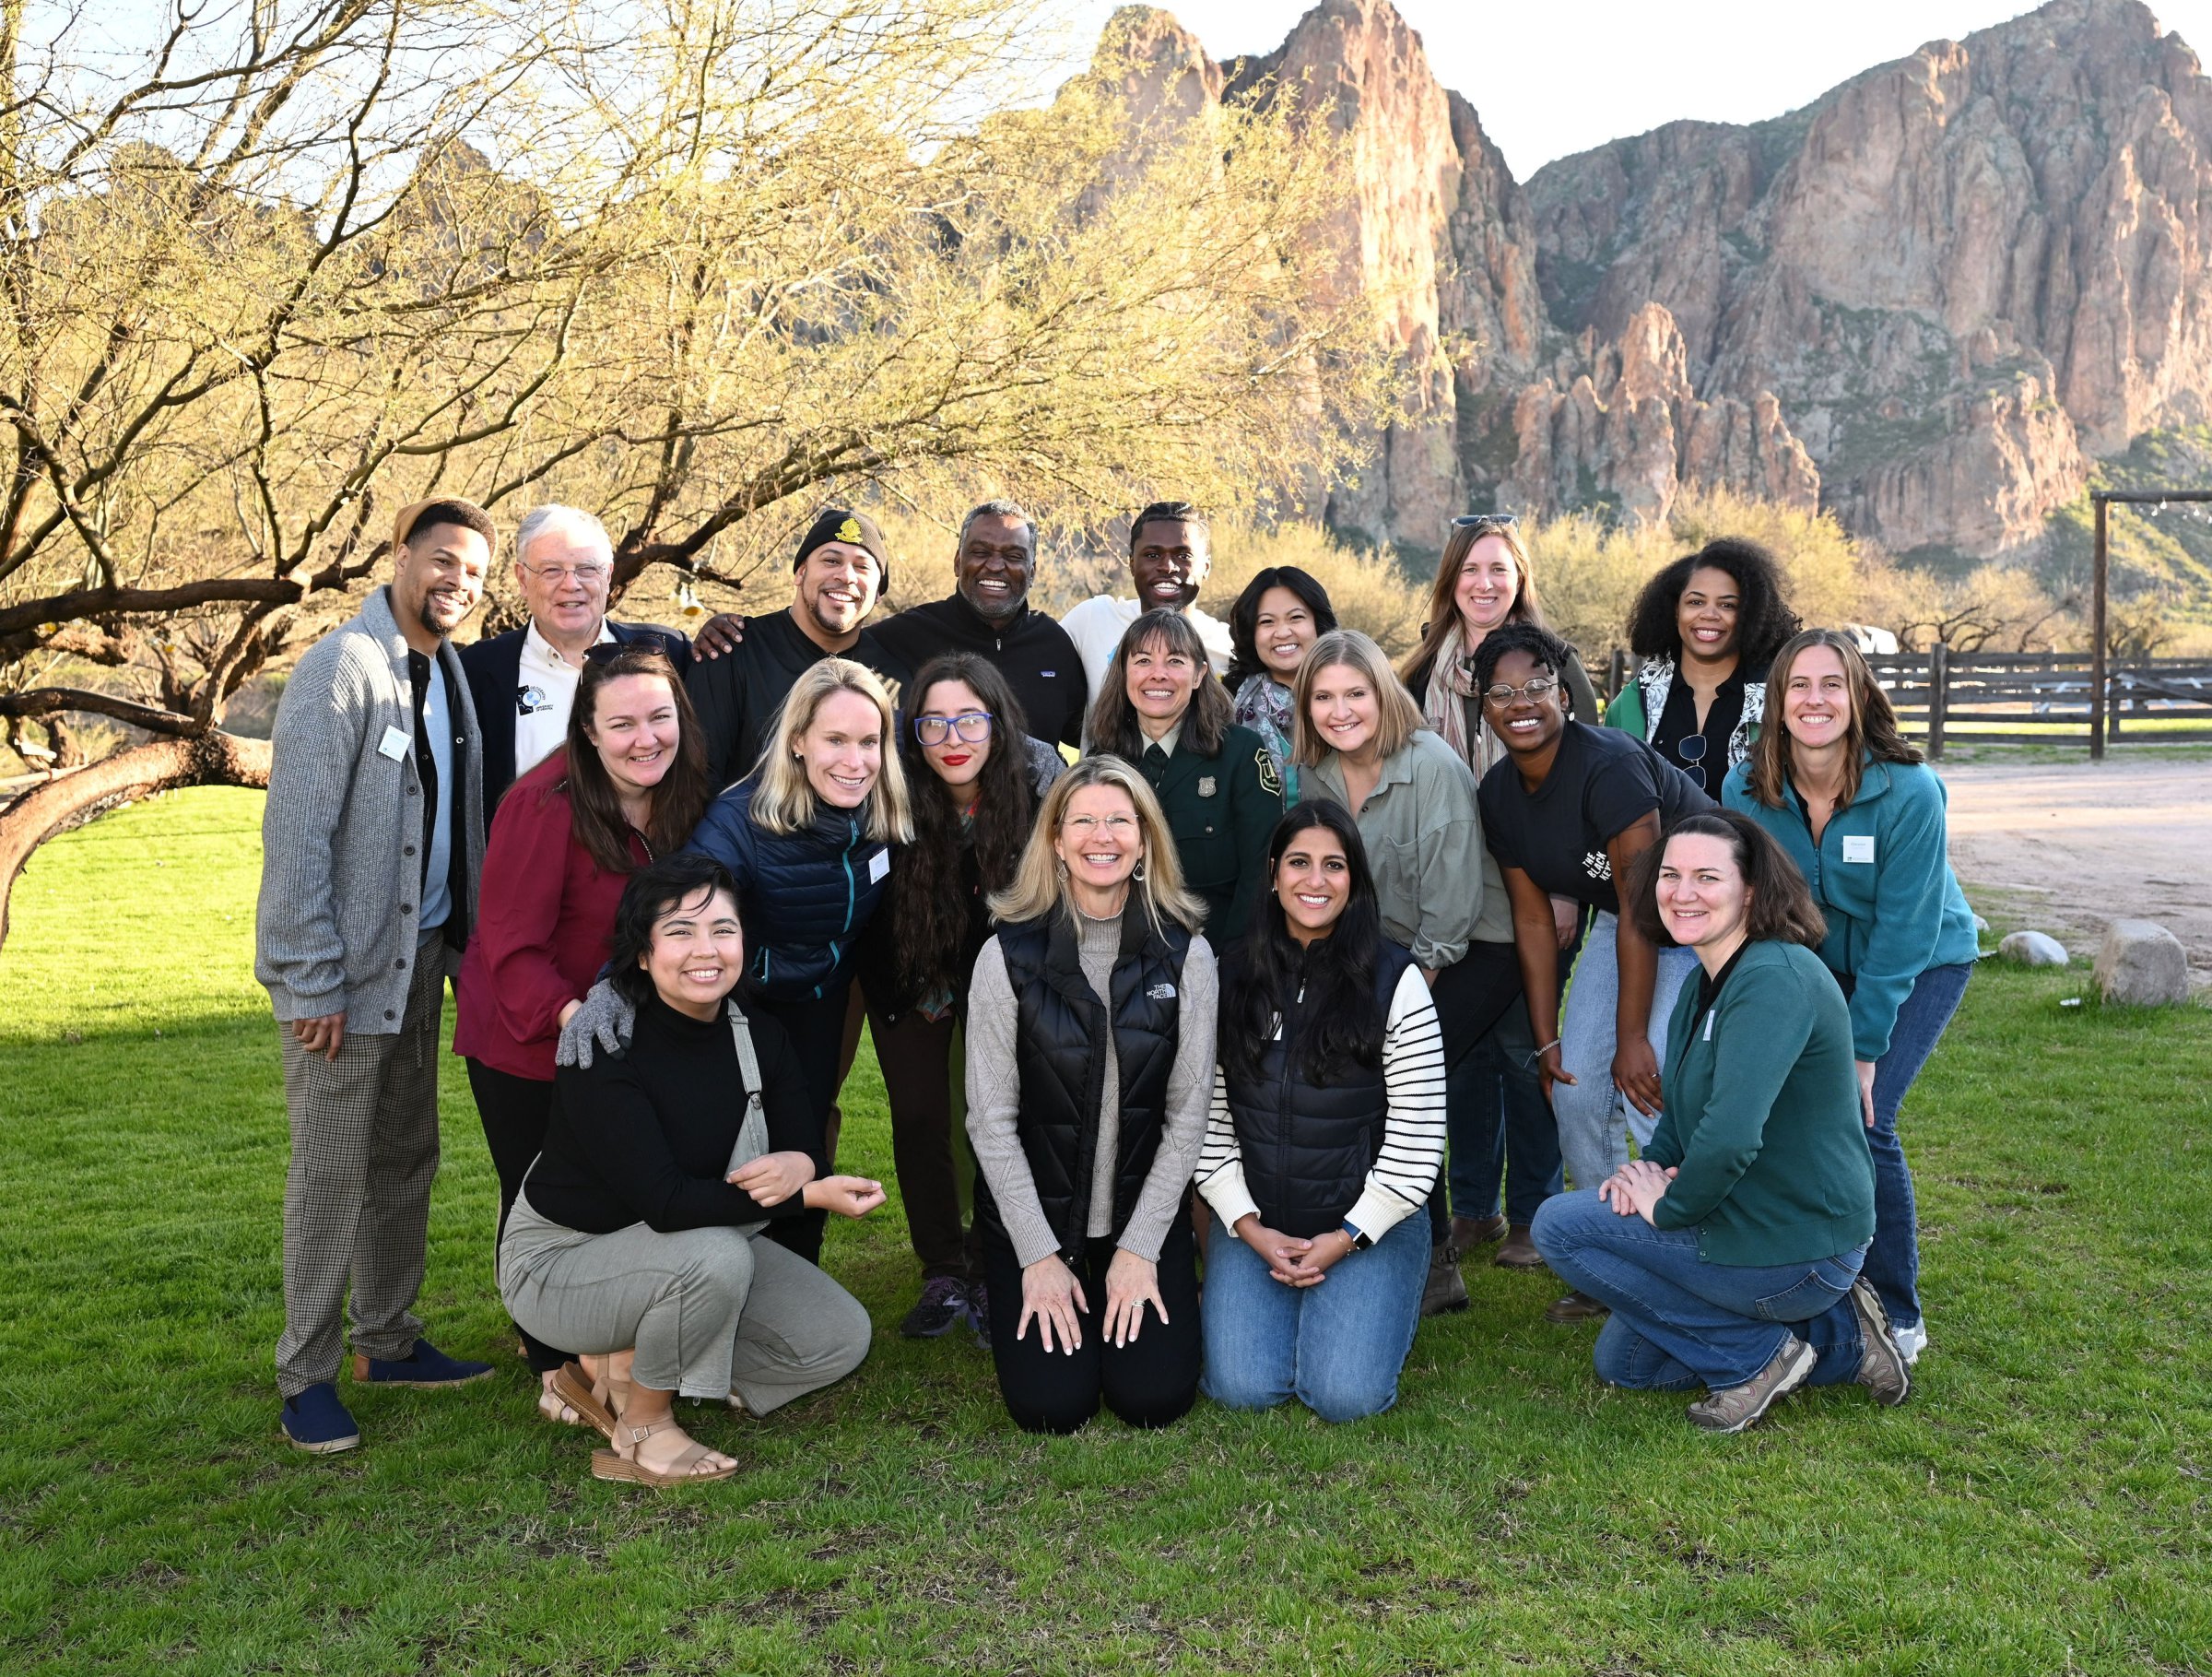 Jackie, top right, in a group picture of the fellows and New Sector Alliance Staff at the welcome retreat in Arizona.